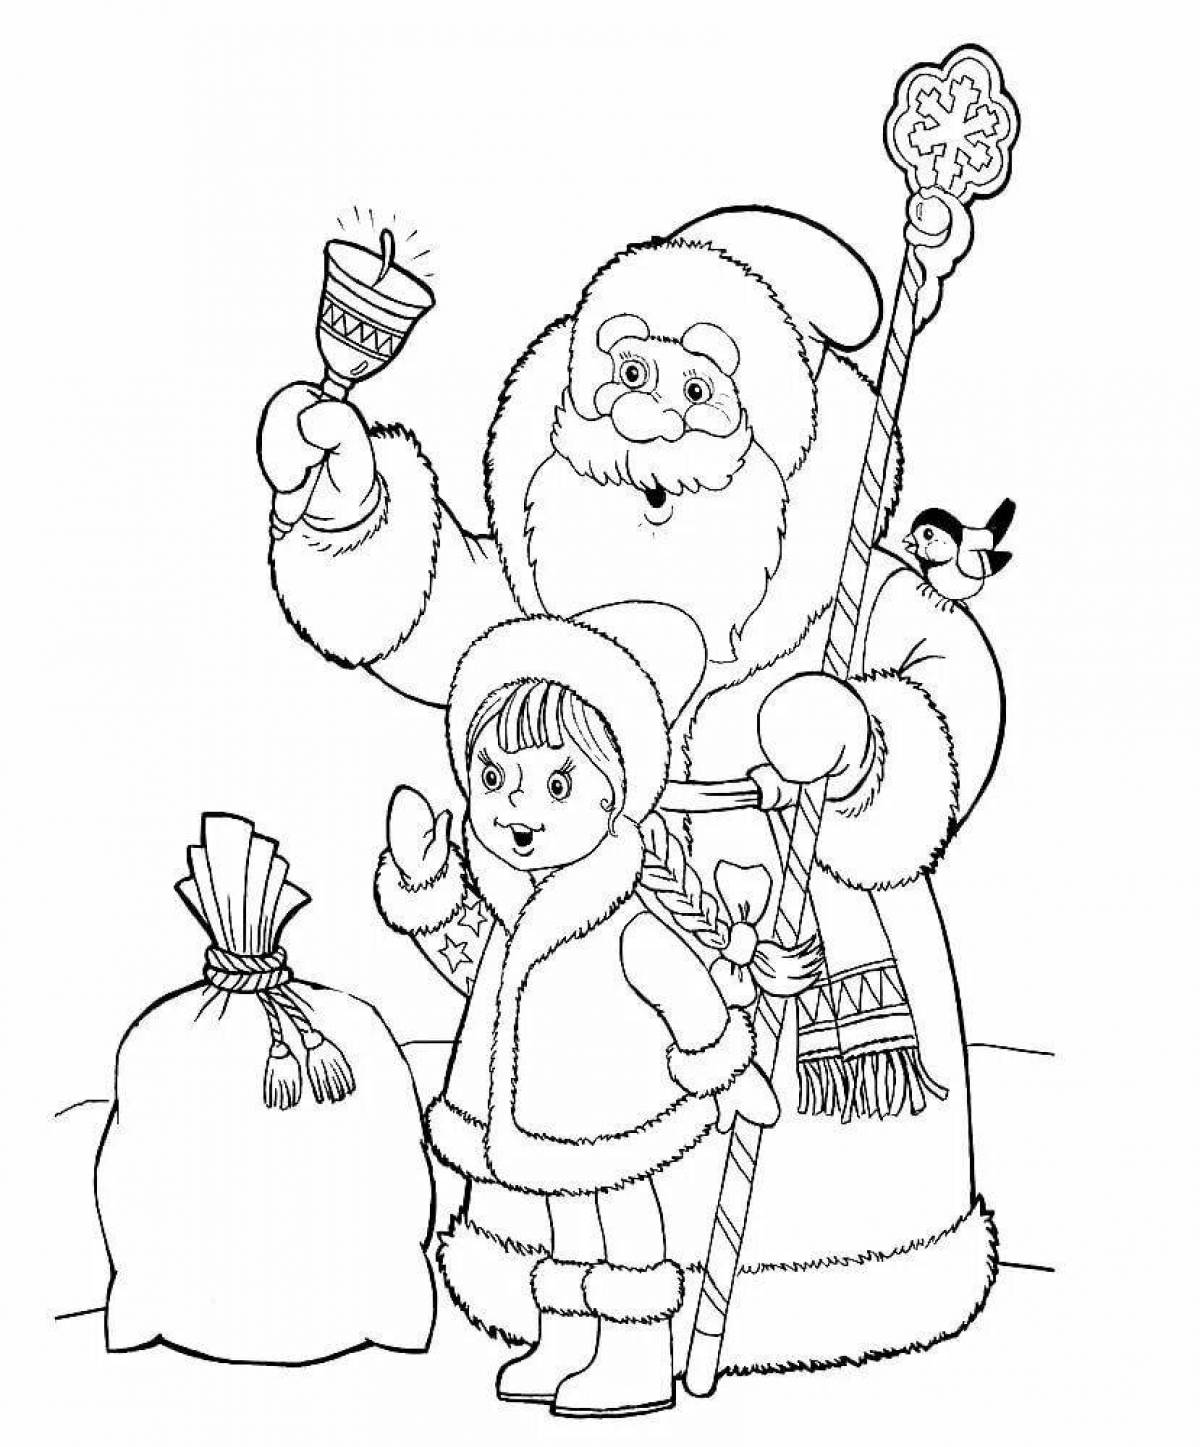 Glowing Santa Claus and Snow Maiden Christmas Coloring Pages